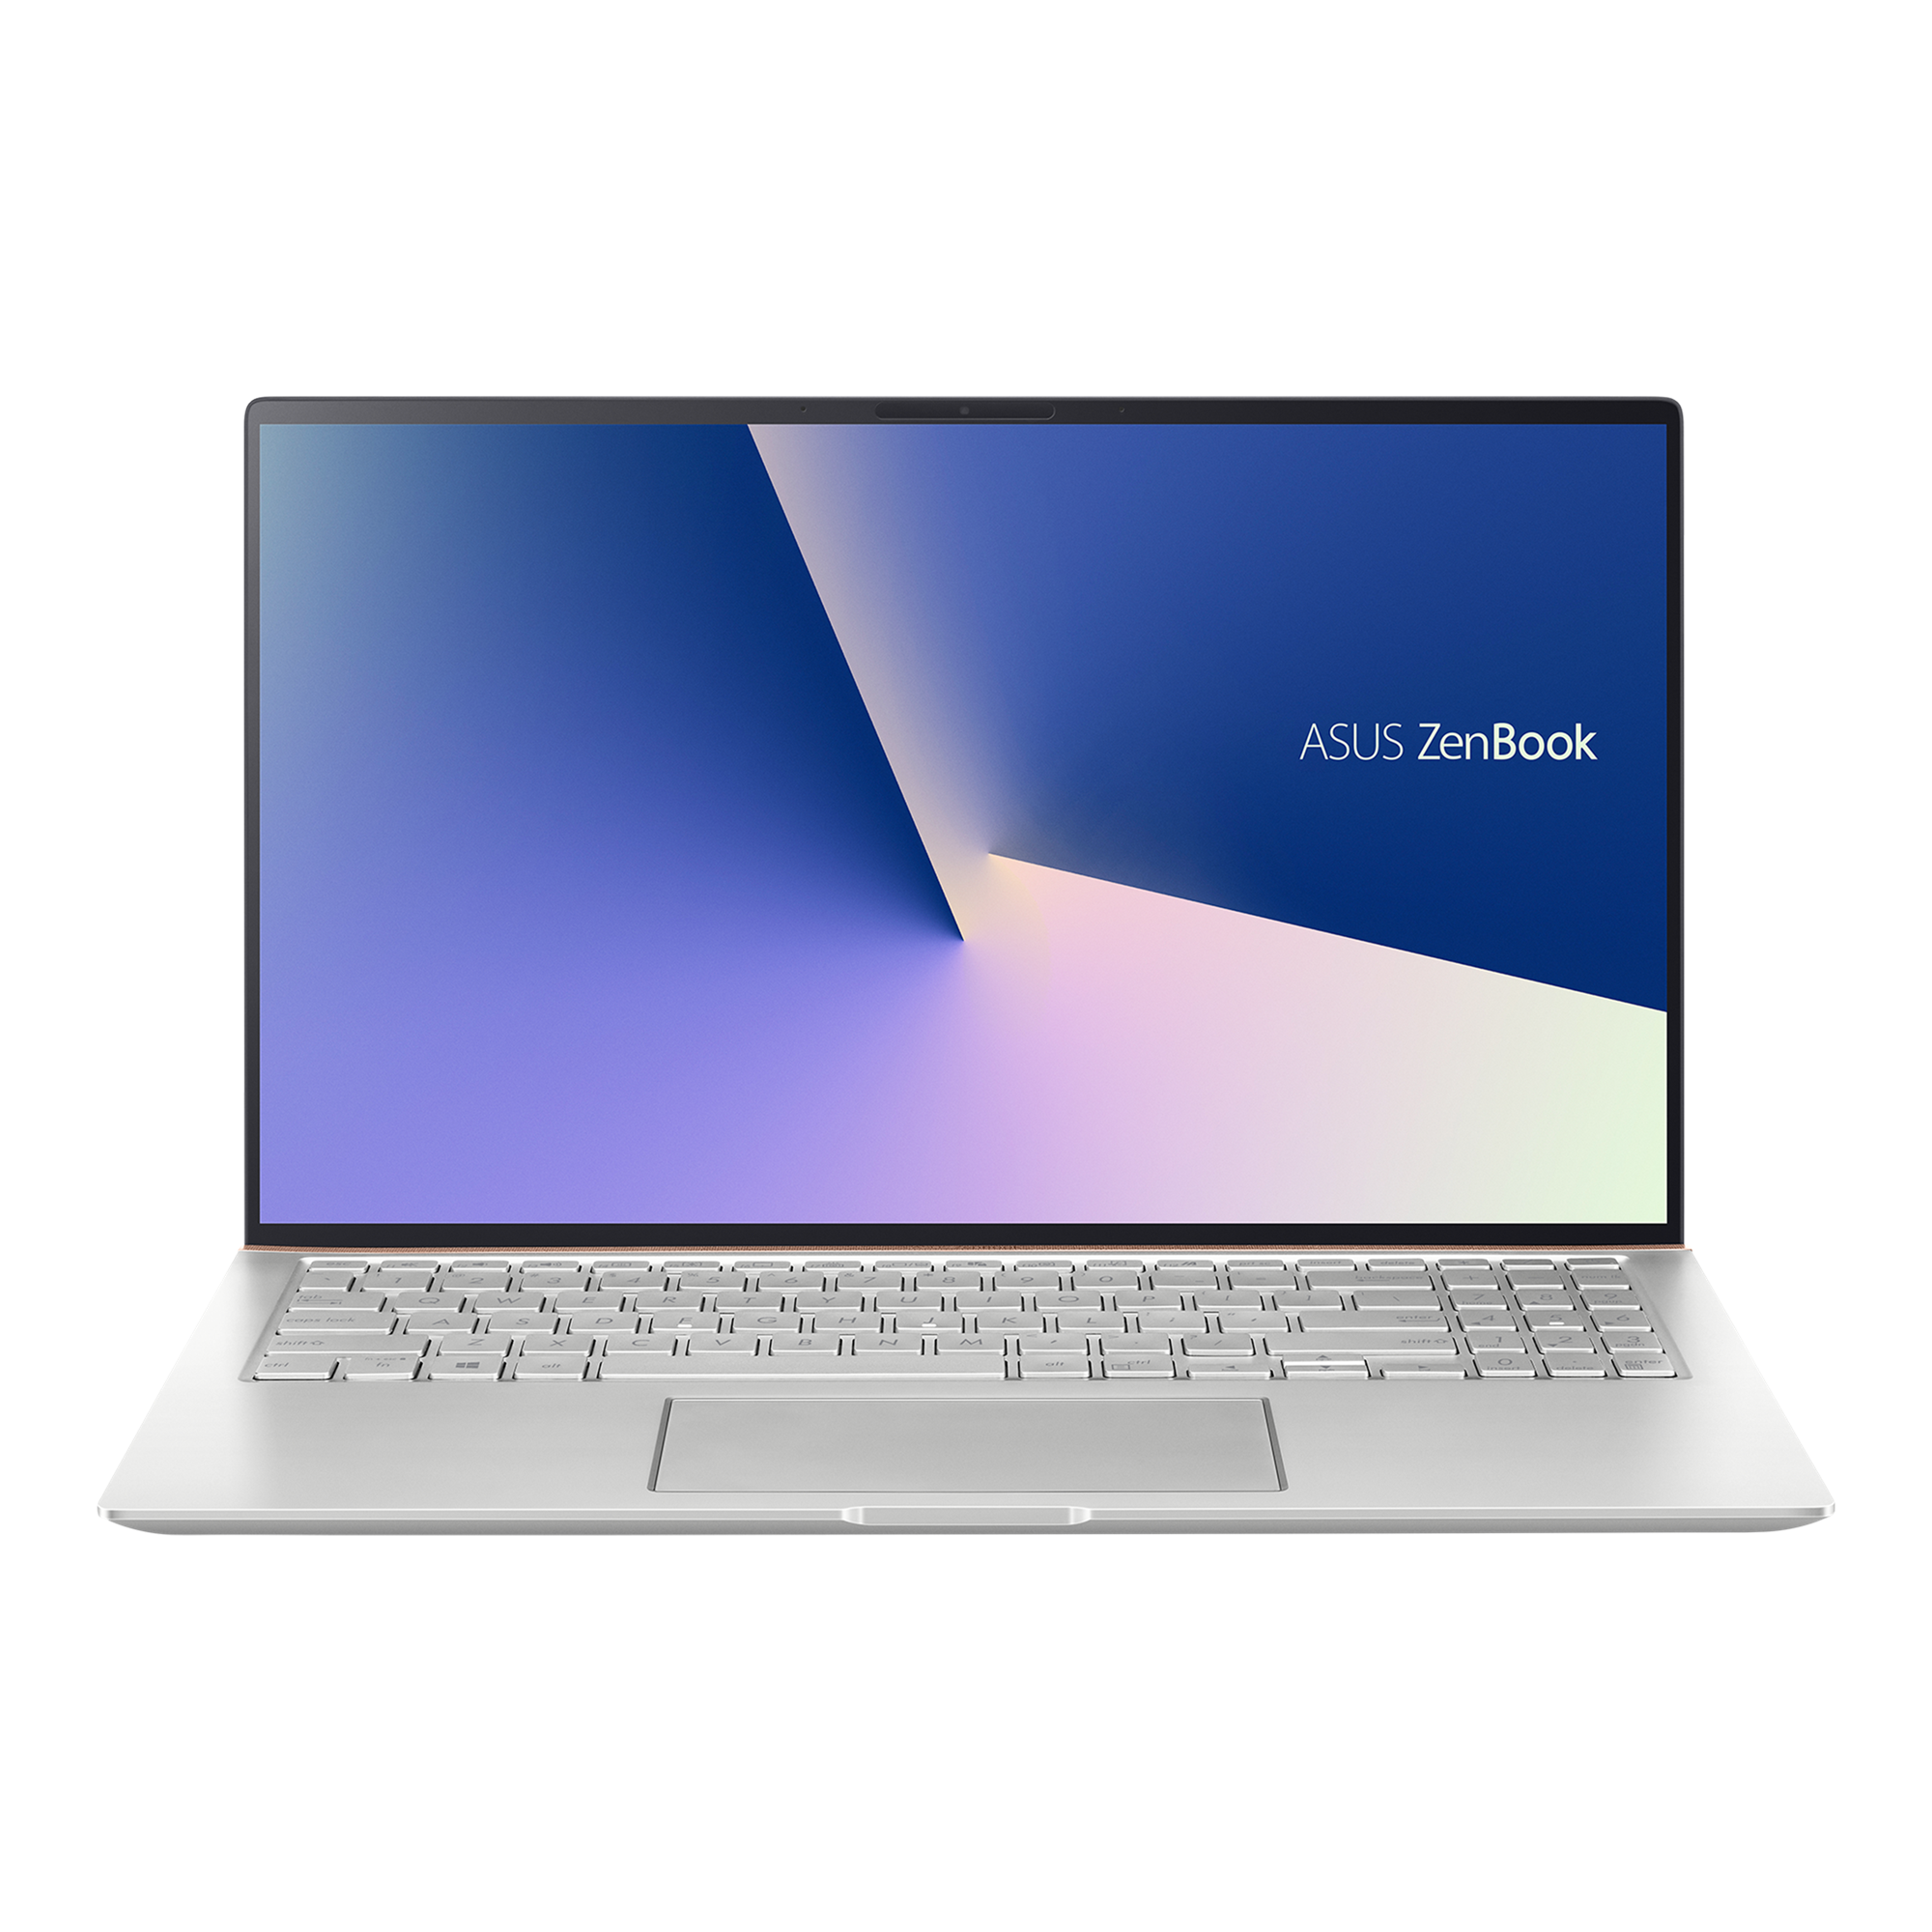 ASUS Zenbook 15 UX533｜Laptops For Home｜ASUS USA